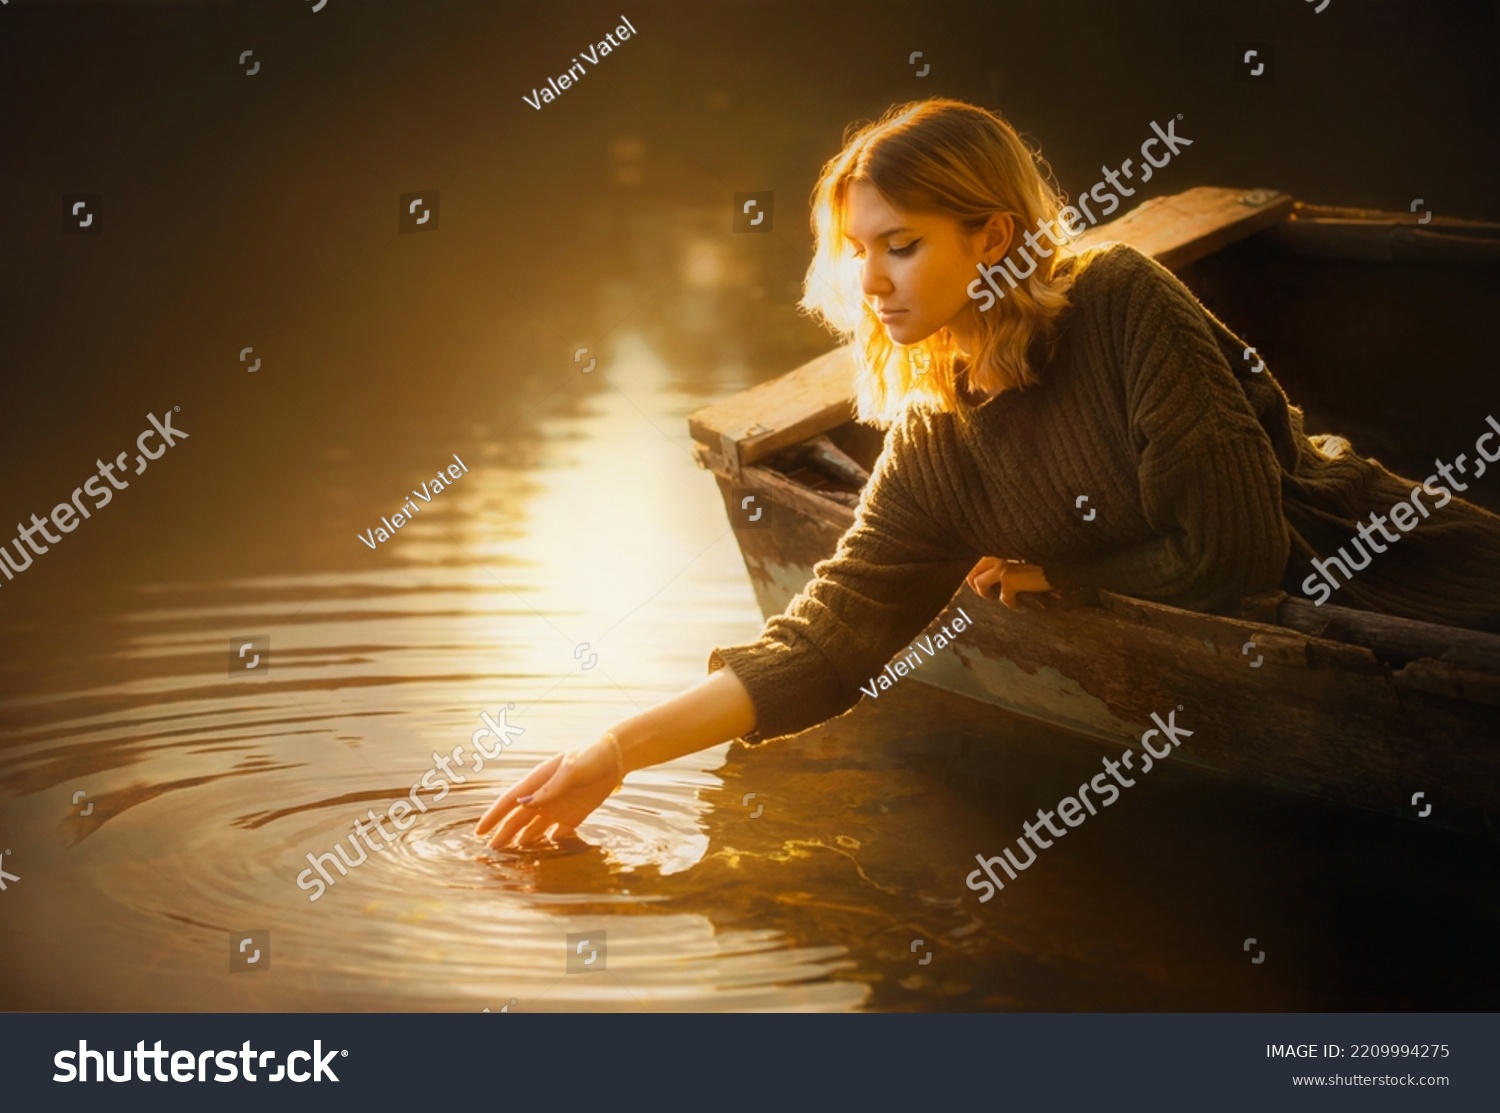  A beautiful blonde woman in a sweater sits in an old fishing boat and touches the surface of the river water with her hand, illuminated by the light of the rising sun. Tranquility and a fairy tale. #2209994275